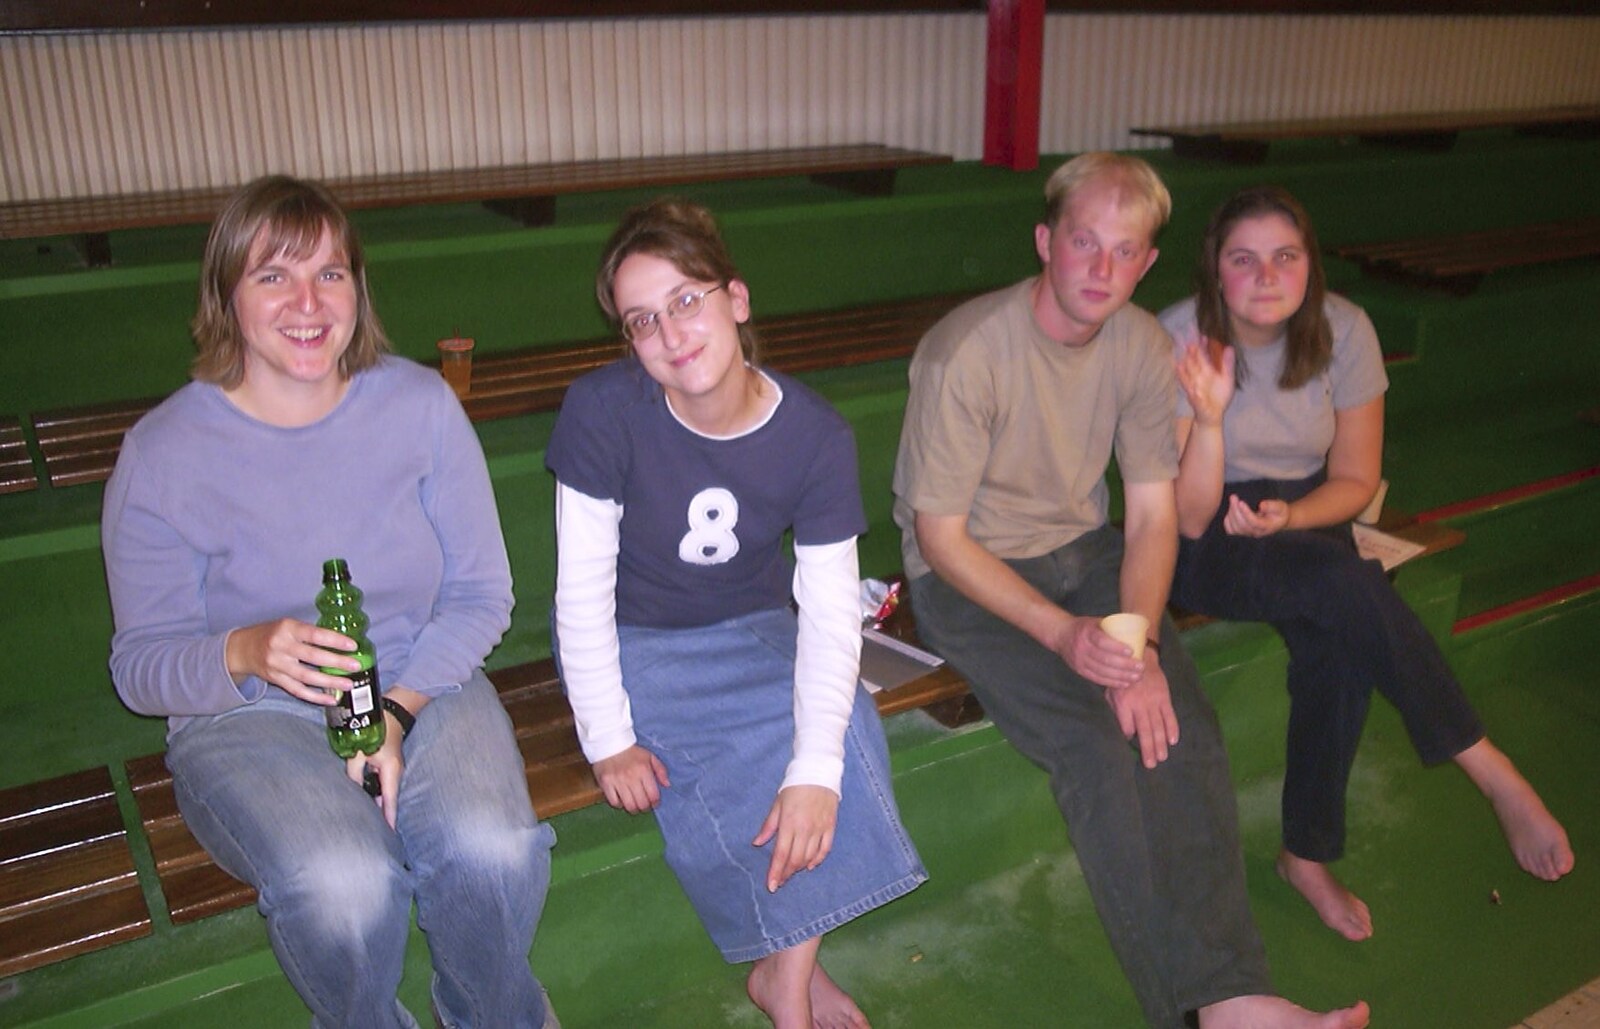 A Sponsored Swim, House Repairs and CISU at the Social Club, Brome, Diss and Ipswich - 5th October 2003: Sarah, Suey, Paul and Claire watch from the sidelines